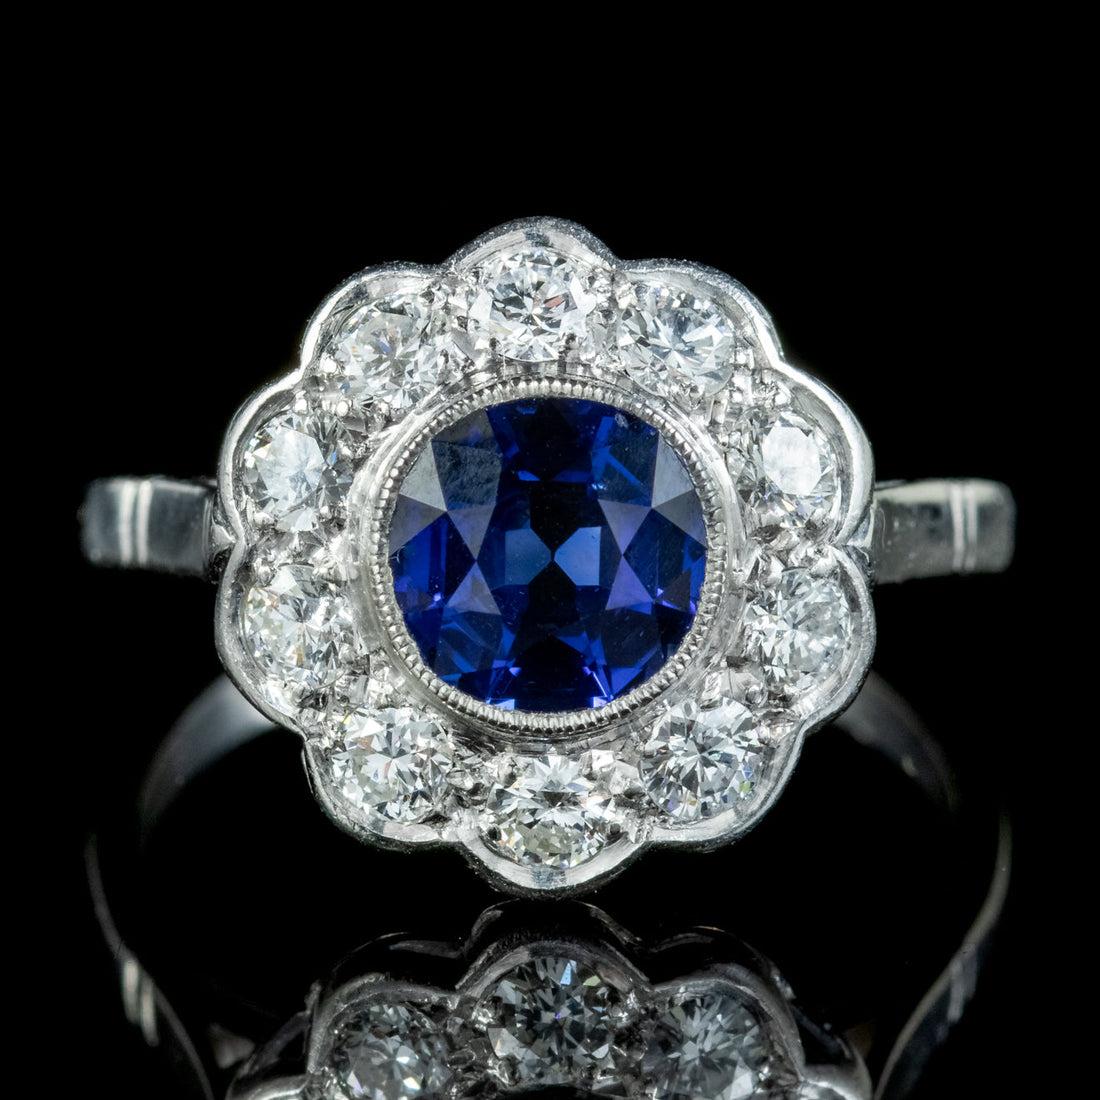 A gorgeous Antique Edwardian daisy ring from the early 20th Century boasting a vibrant, deep blue Sapphire collet set in the centre with a halo of sparkling brilliant cut Diamond petals.

The Sapphire is approx. 1.25ct and is complemented